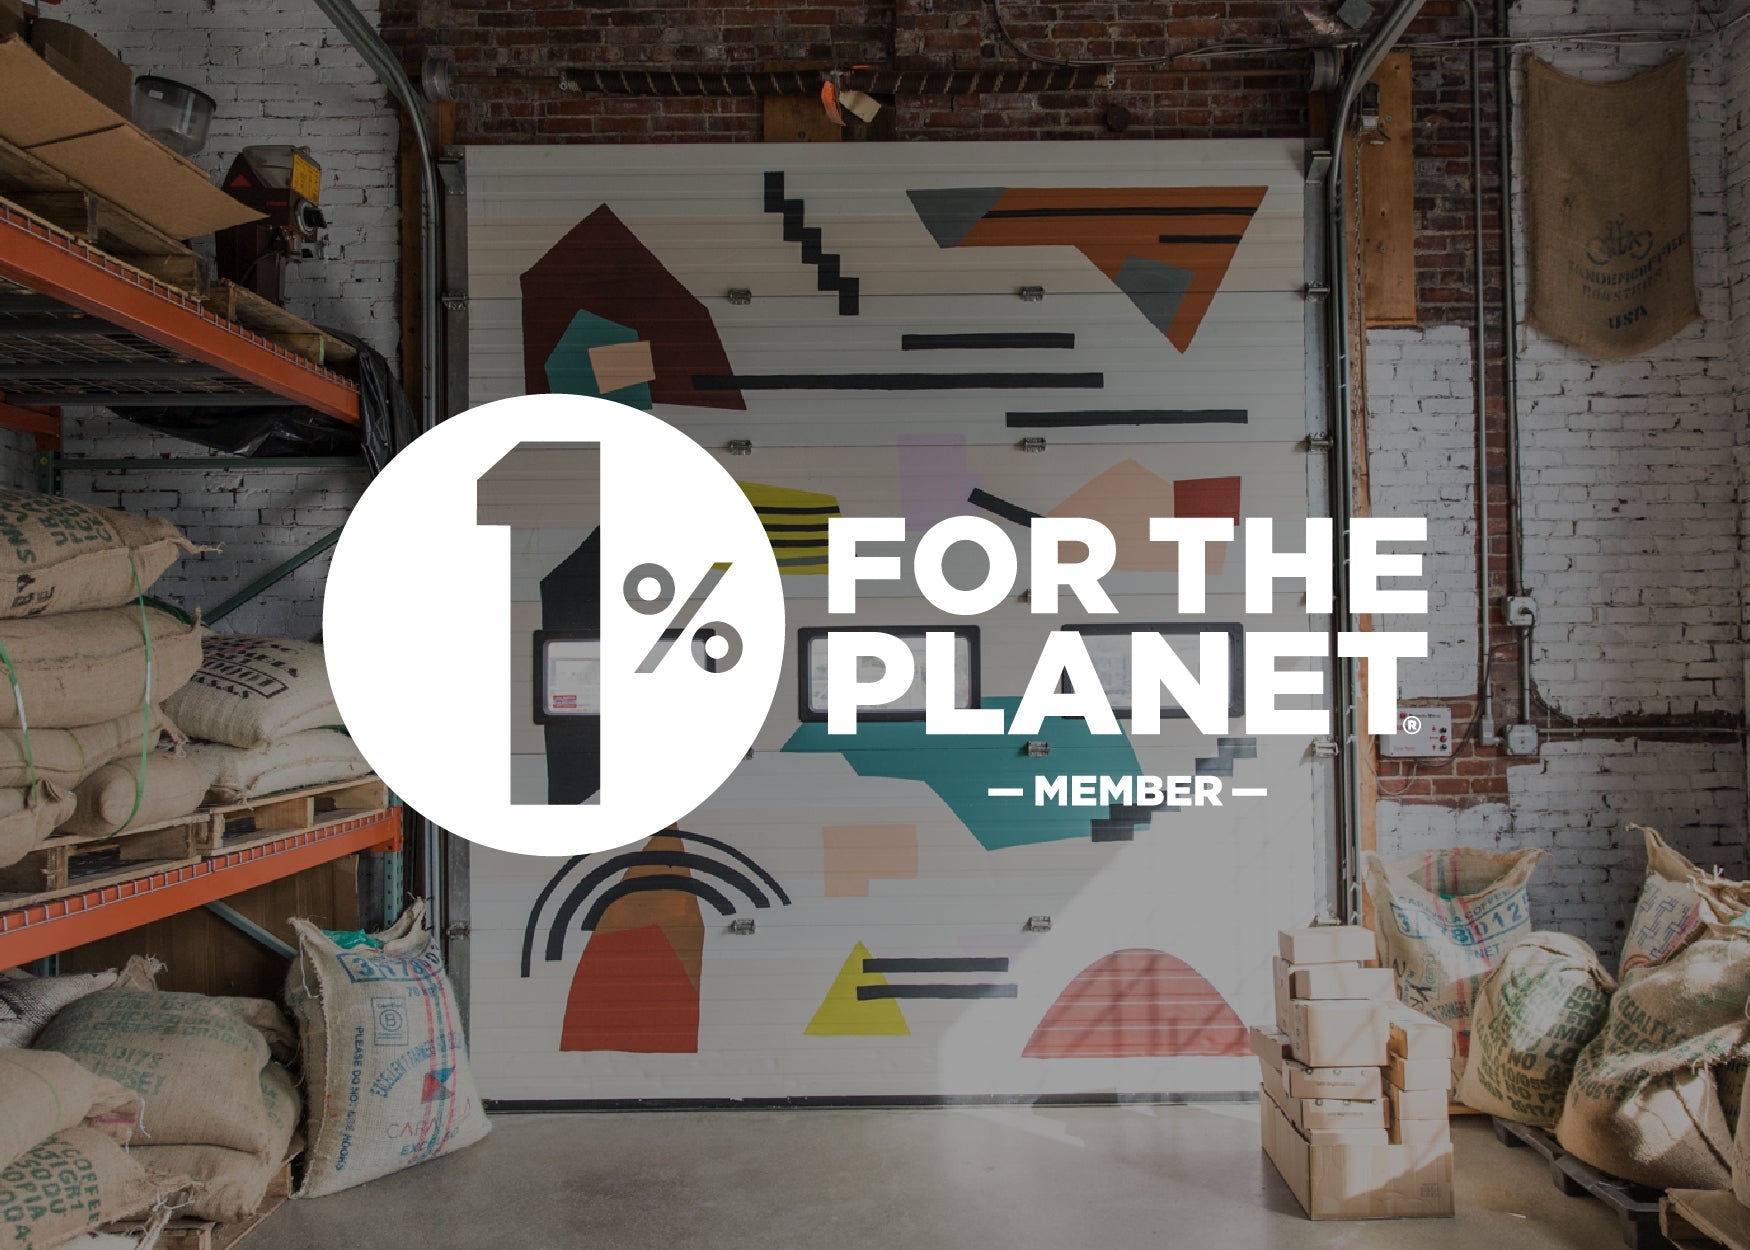 An industrial warehouse with a garage door featuring a modern, geometric mural. in the foreground, there are burlap sacks and wooden crates. a logo reads "1% for the planet - member.